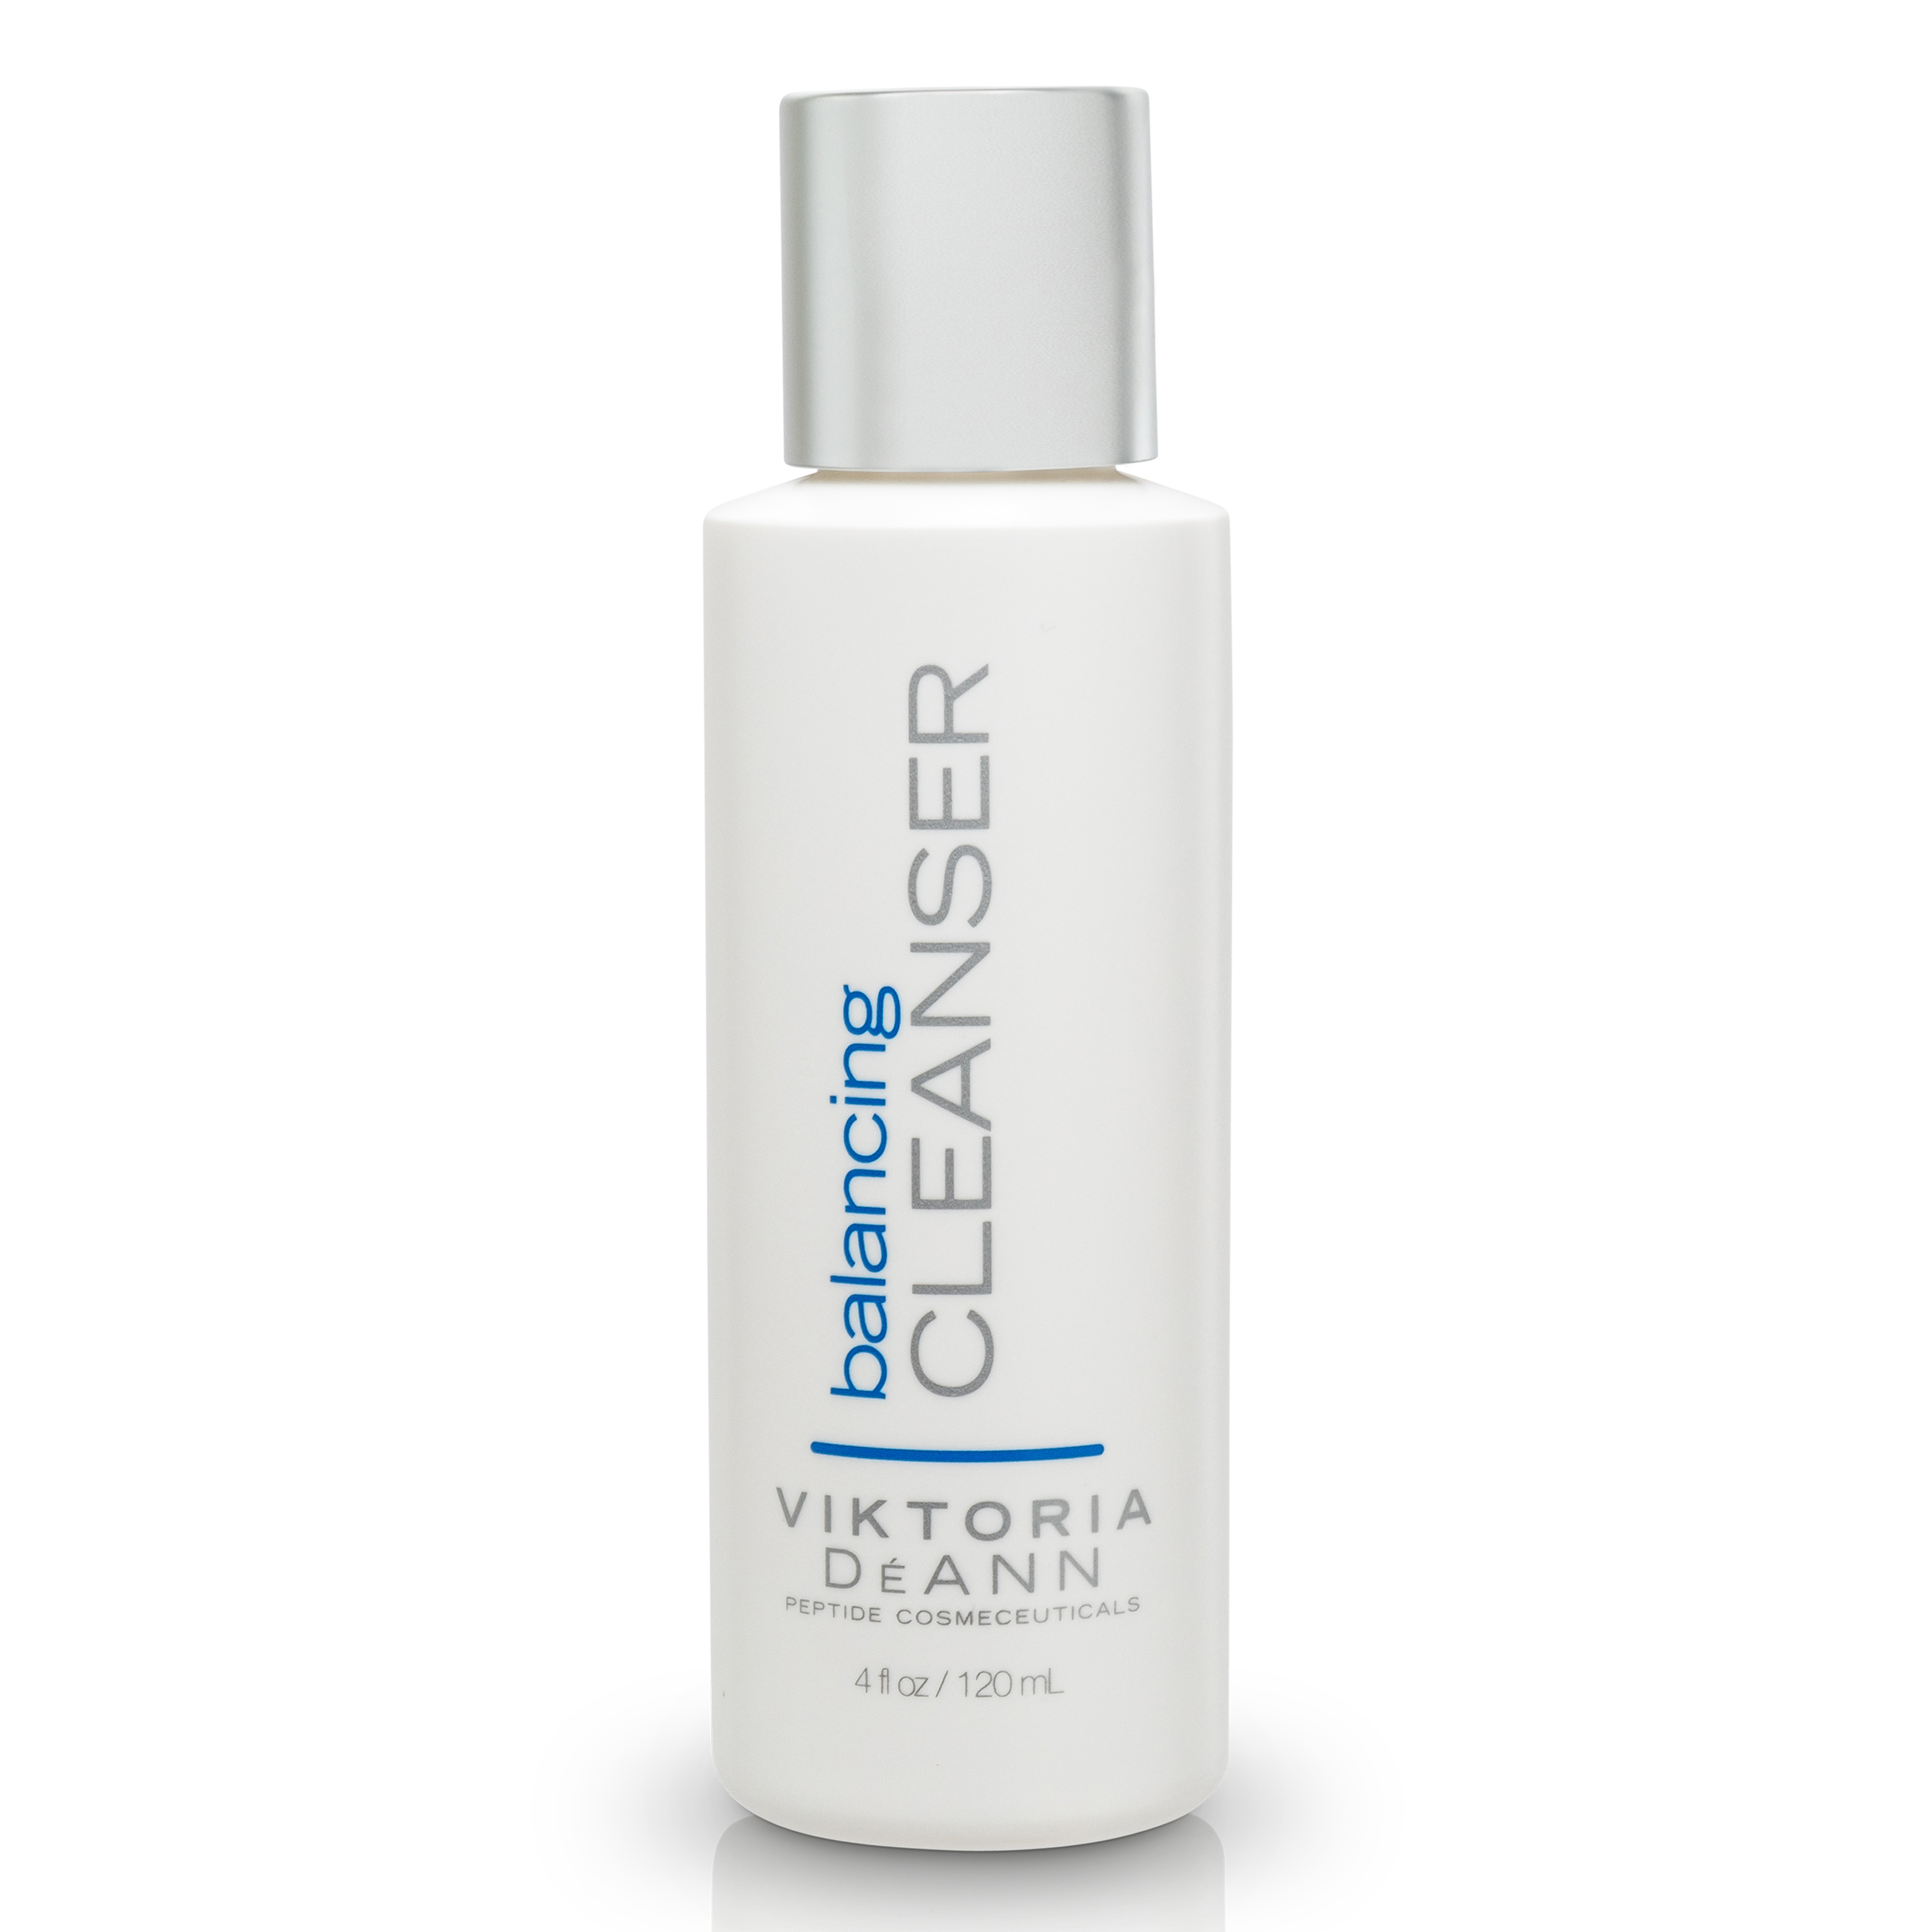 Purifying cleanser foam. " Purifying Cleanser - Hydro-Peptide", 200 мл.. Purifying Cleanser. Космецевтика. Космецевтика Алтайская.